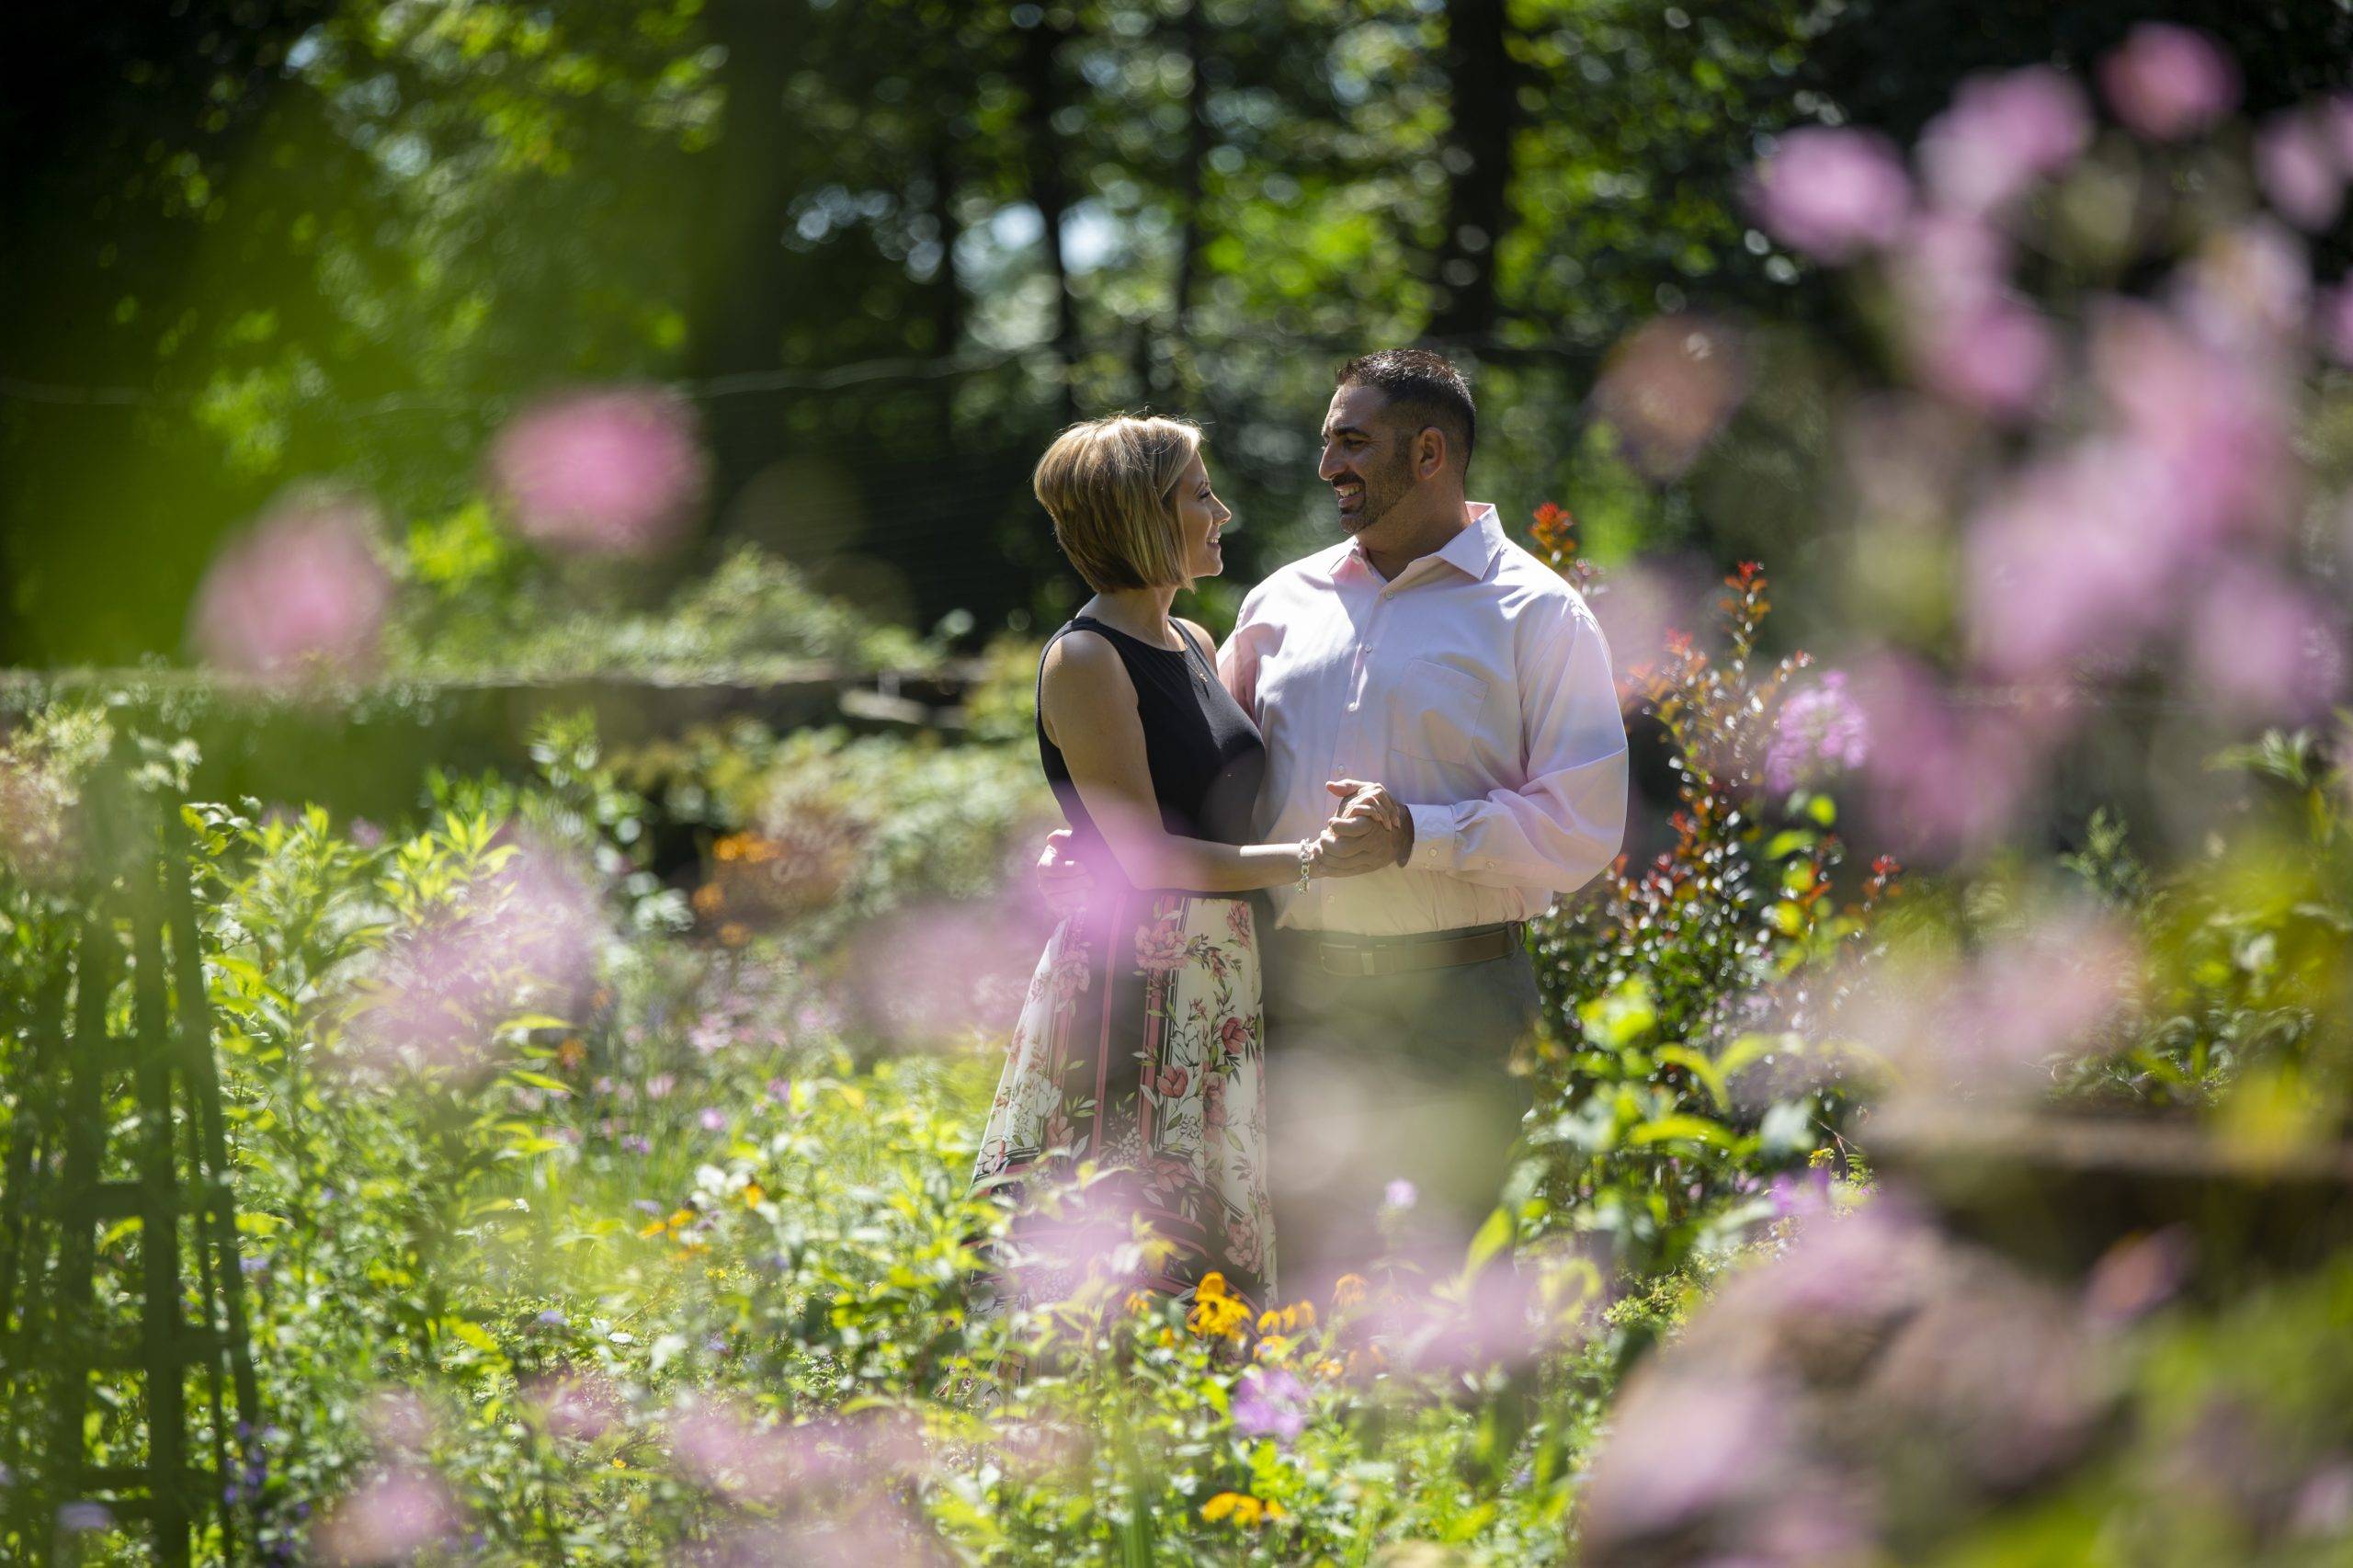 An engaged couple standing in a field of flowers.